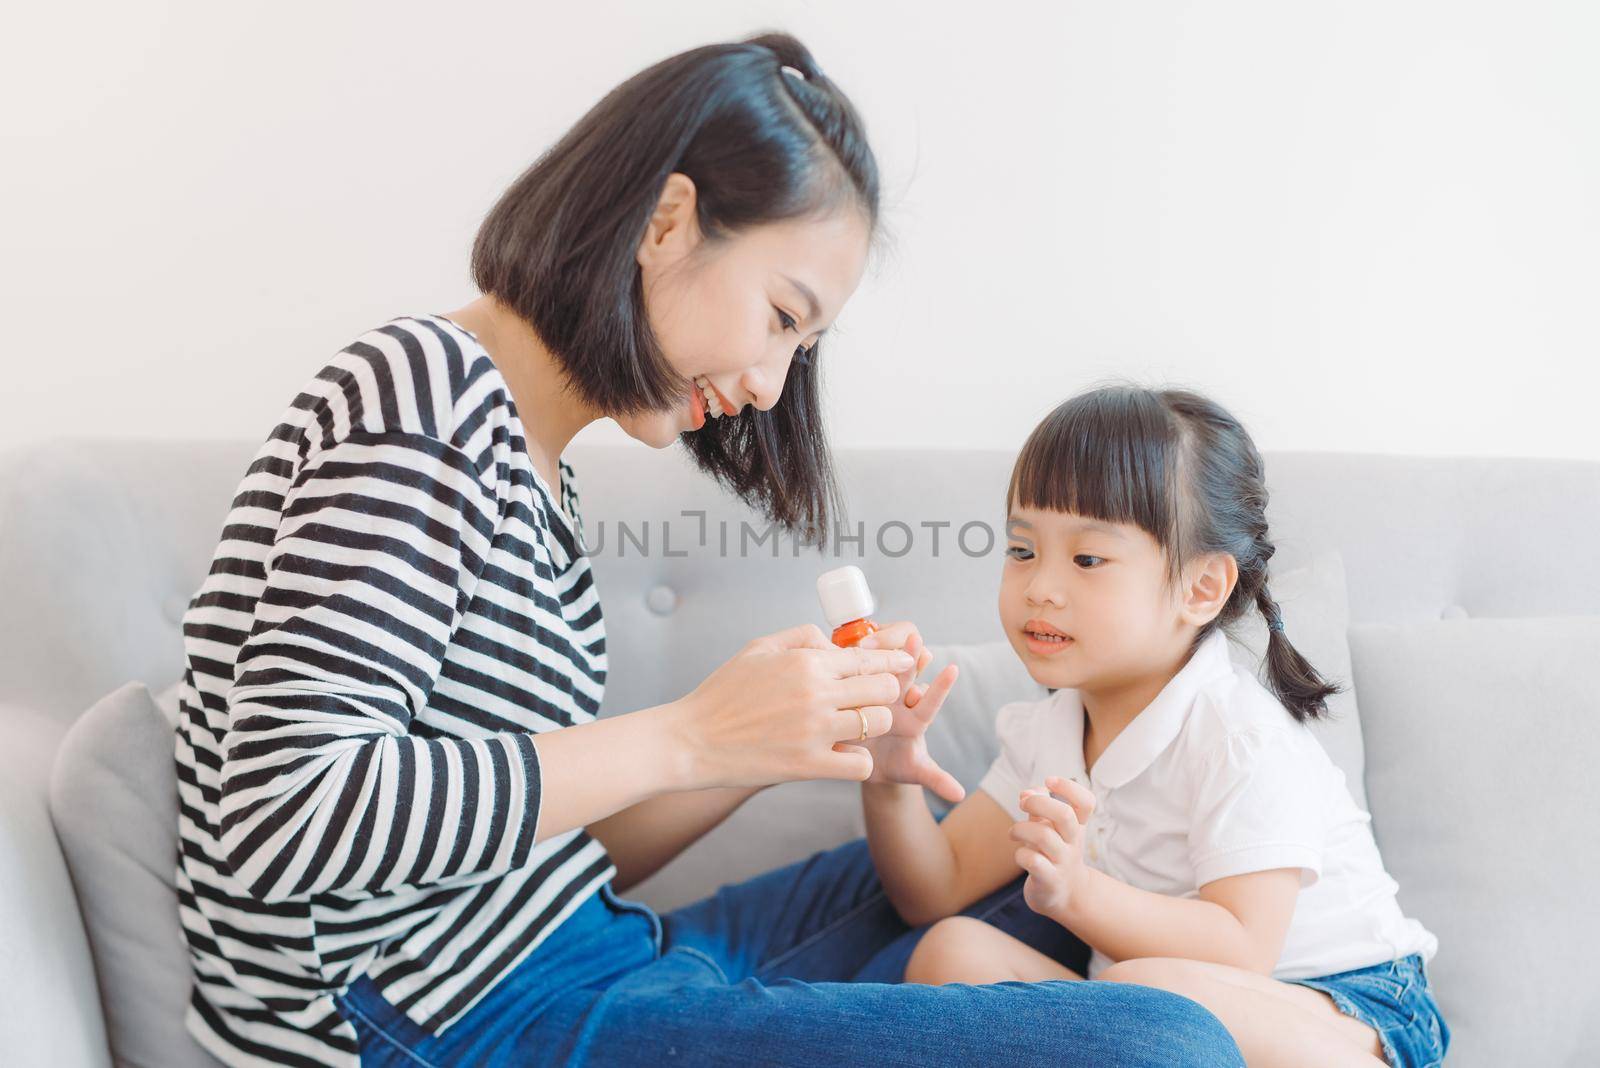 Mom paints nails to daughter by makidotvn